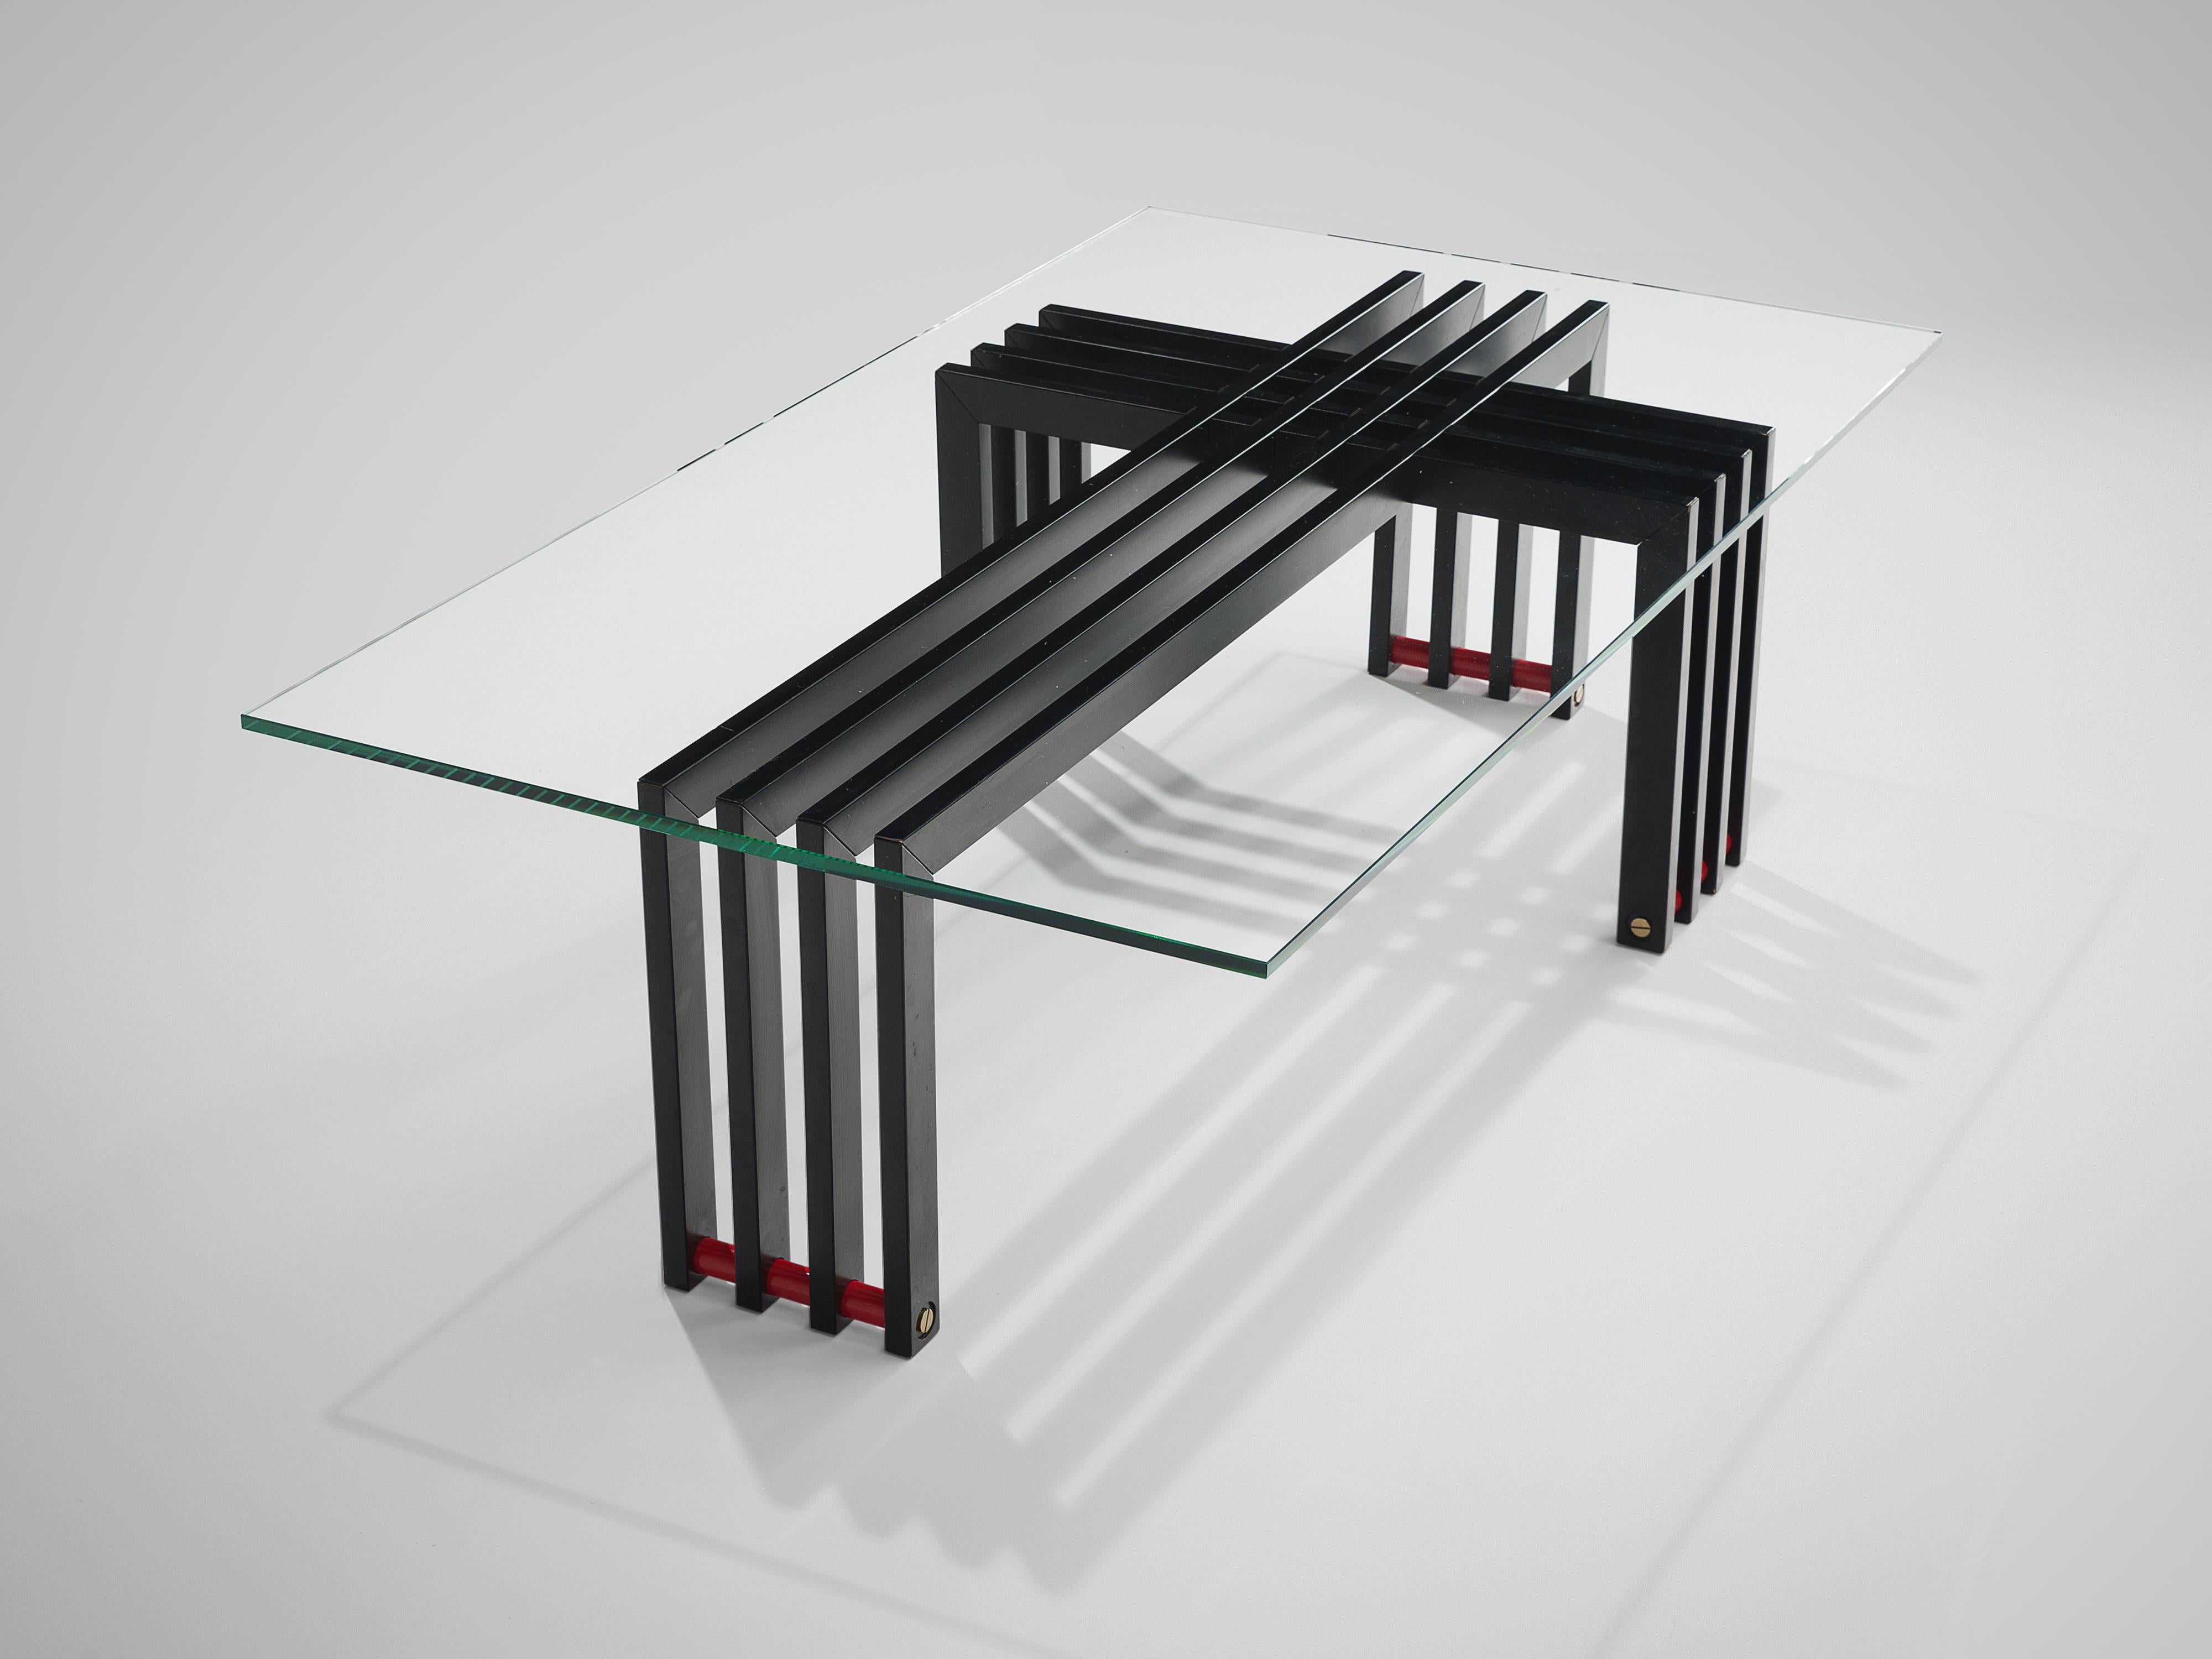 Coffee table, glass, steel, Europe, 1970s.

This sculptural coffee table embodies a transparent glass top and geometric frame and horizontal red slats as a foot. Four curved iron slats form a cross with another four slats of metal. This sculptural